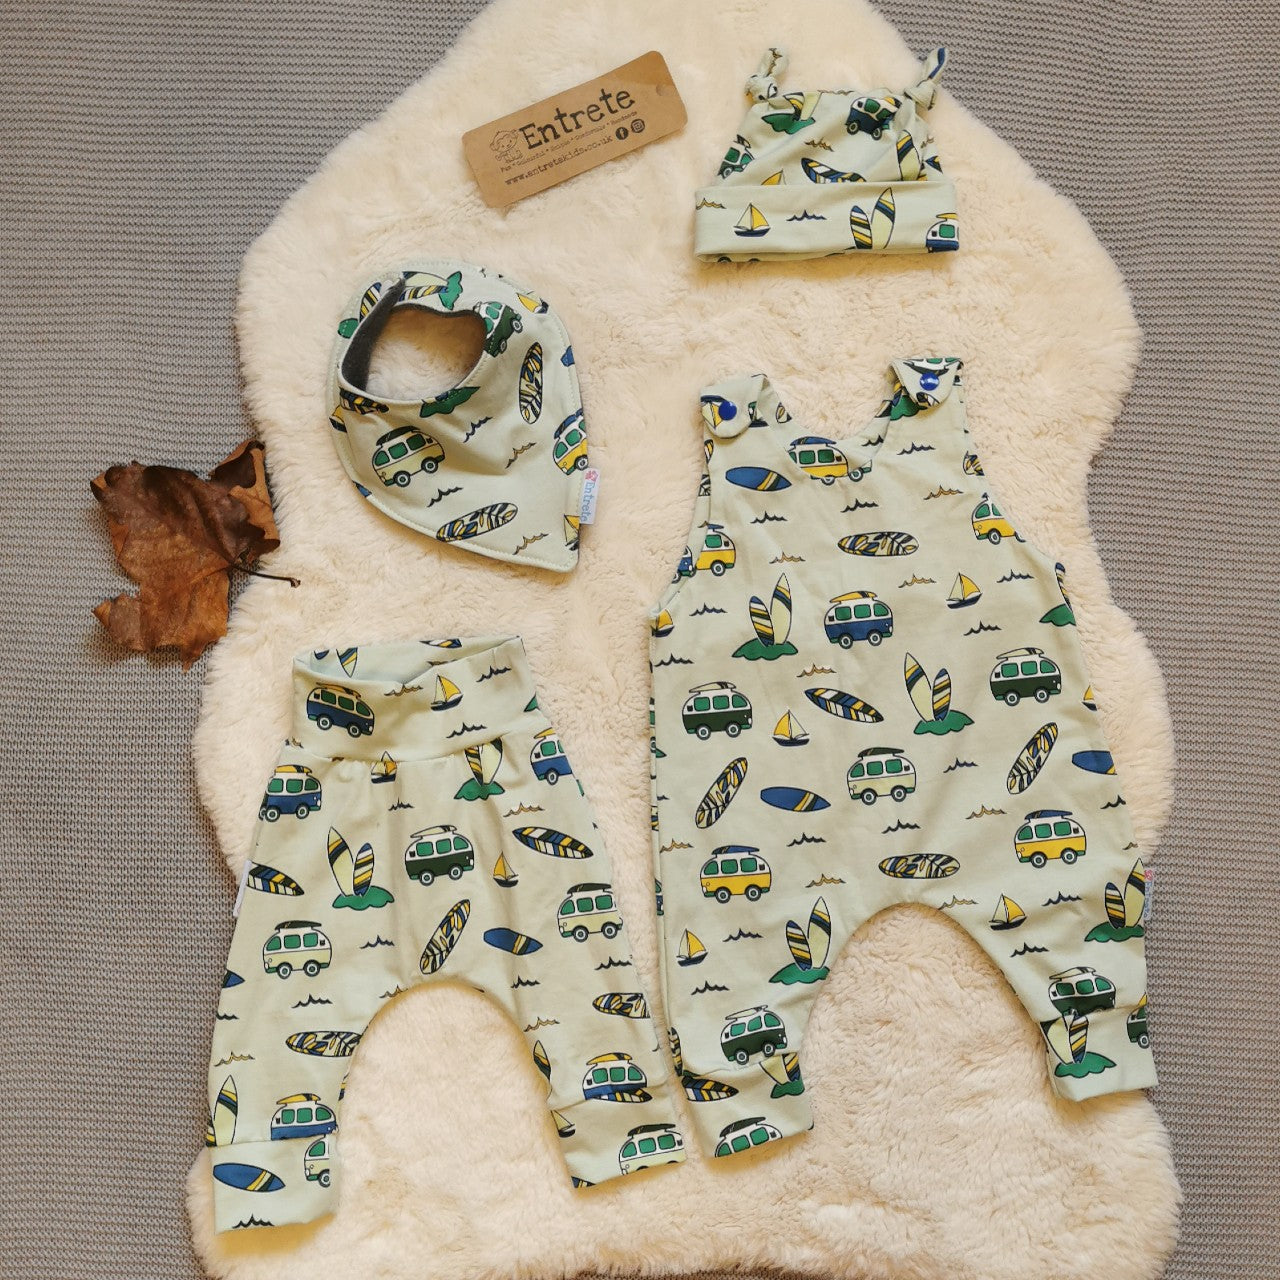 A large baby gift set shown in mint surf campervans for demonstration purposes, your gift set will be handmade using mint penguins organic cotton jersey.